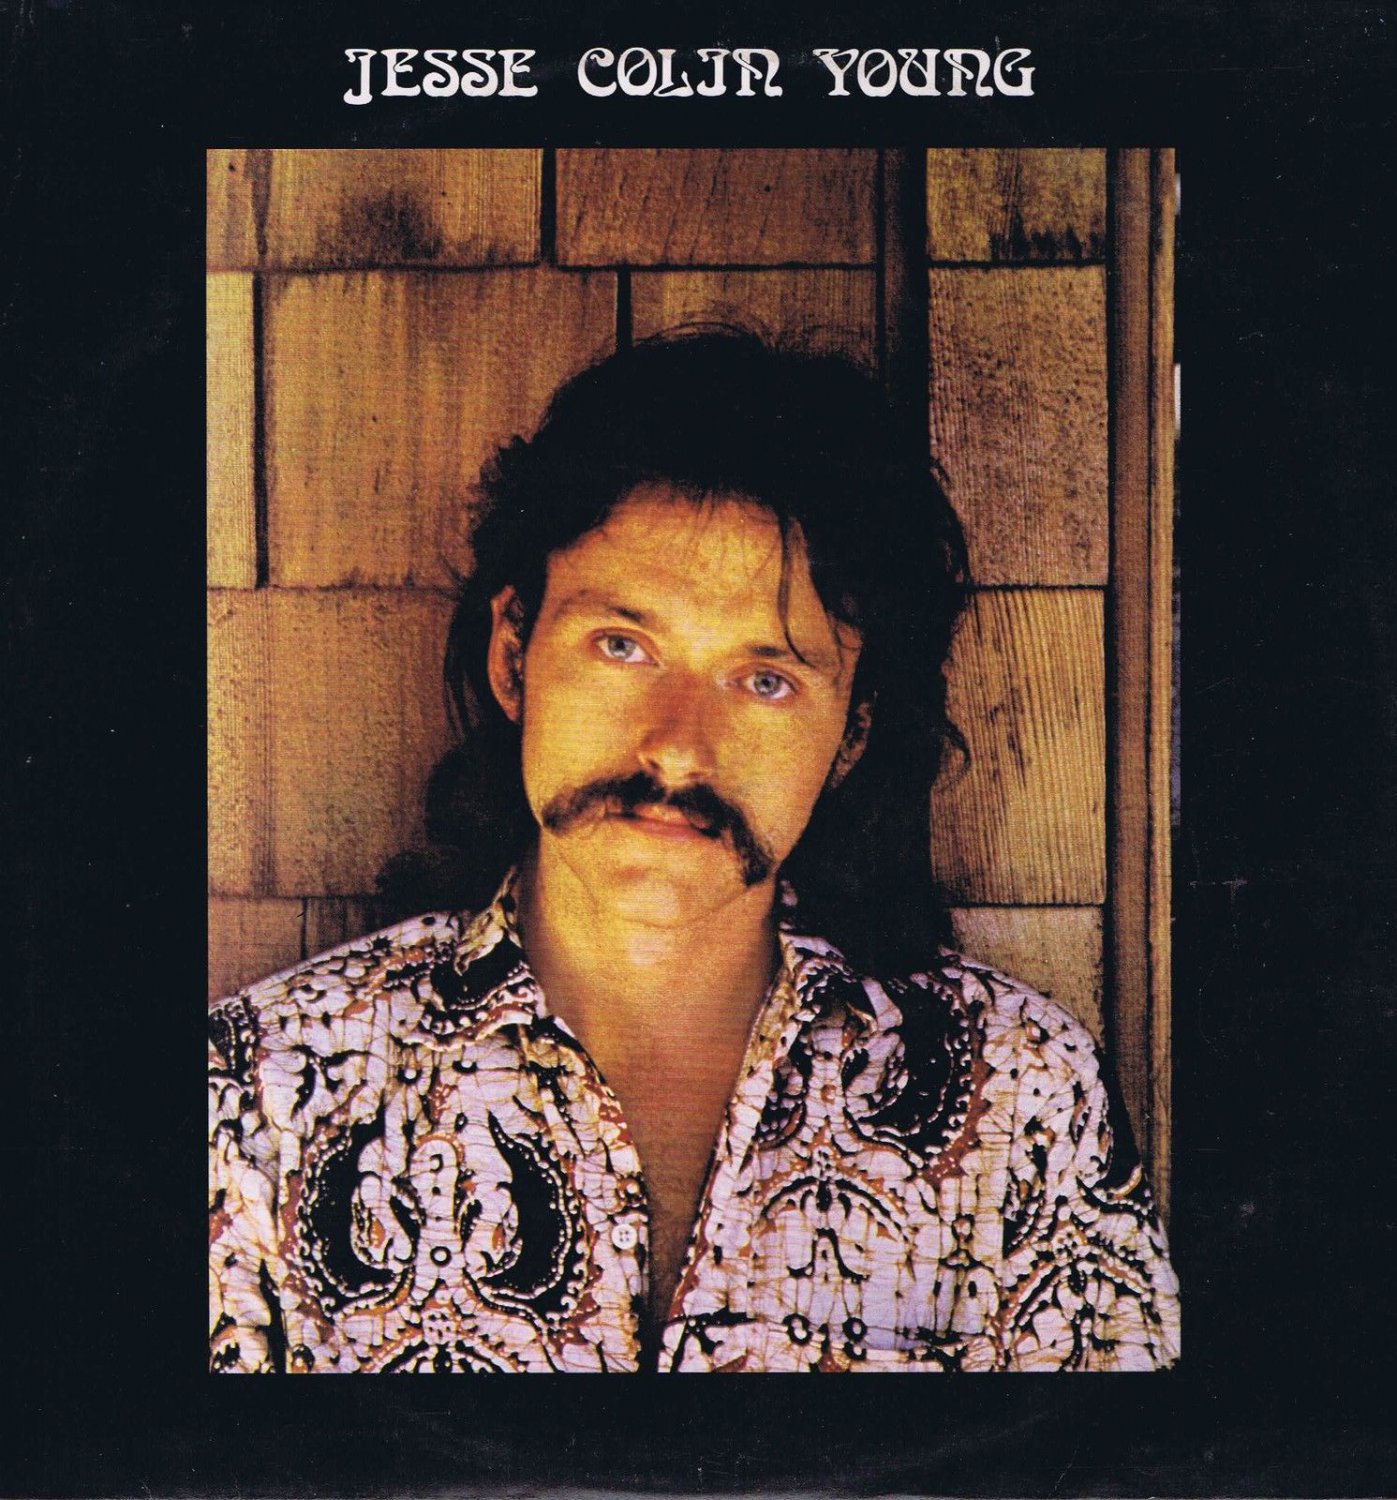 Jesse colin young song for juli